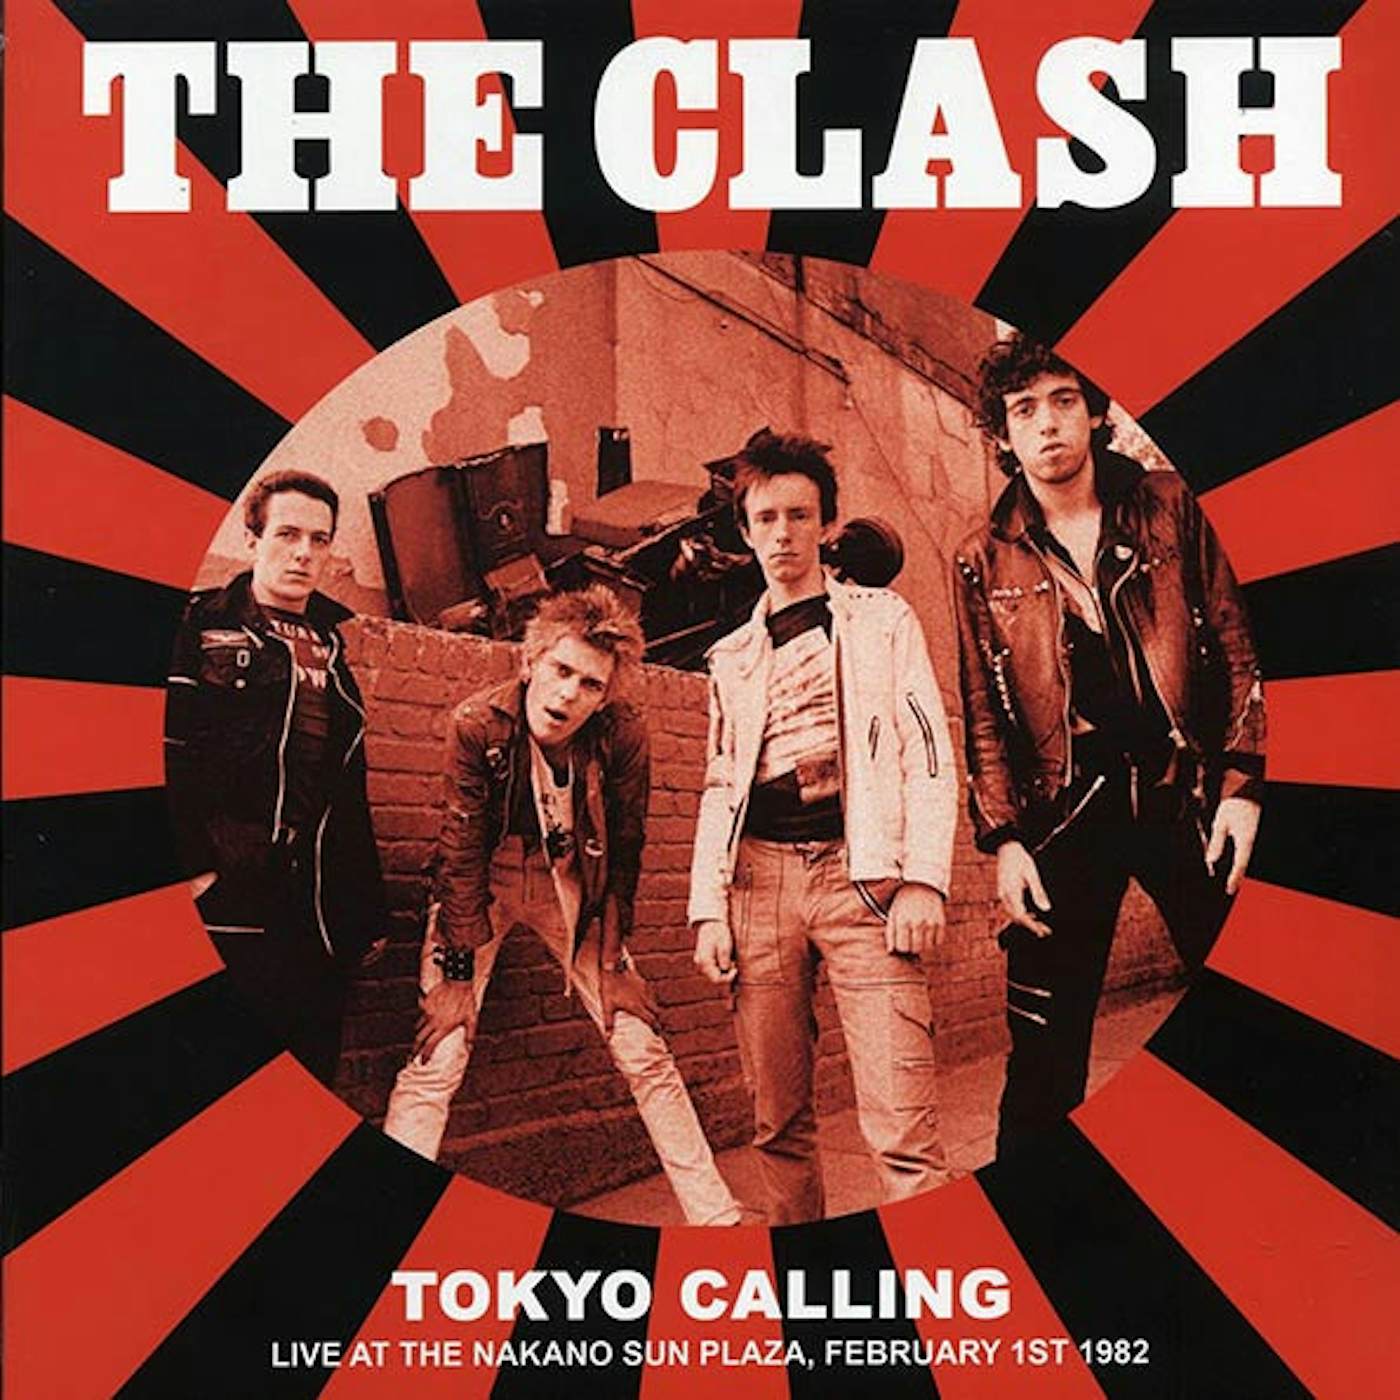 The Clash  LP -  Tokyo Calling: Live At The Nakano Sun Plaza, February 1st 1982 (ltd. 500 copies made) (Vinyl)